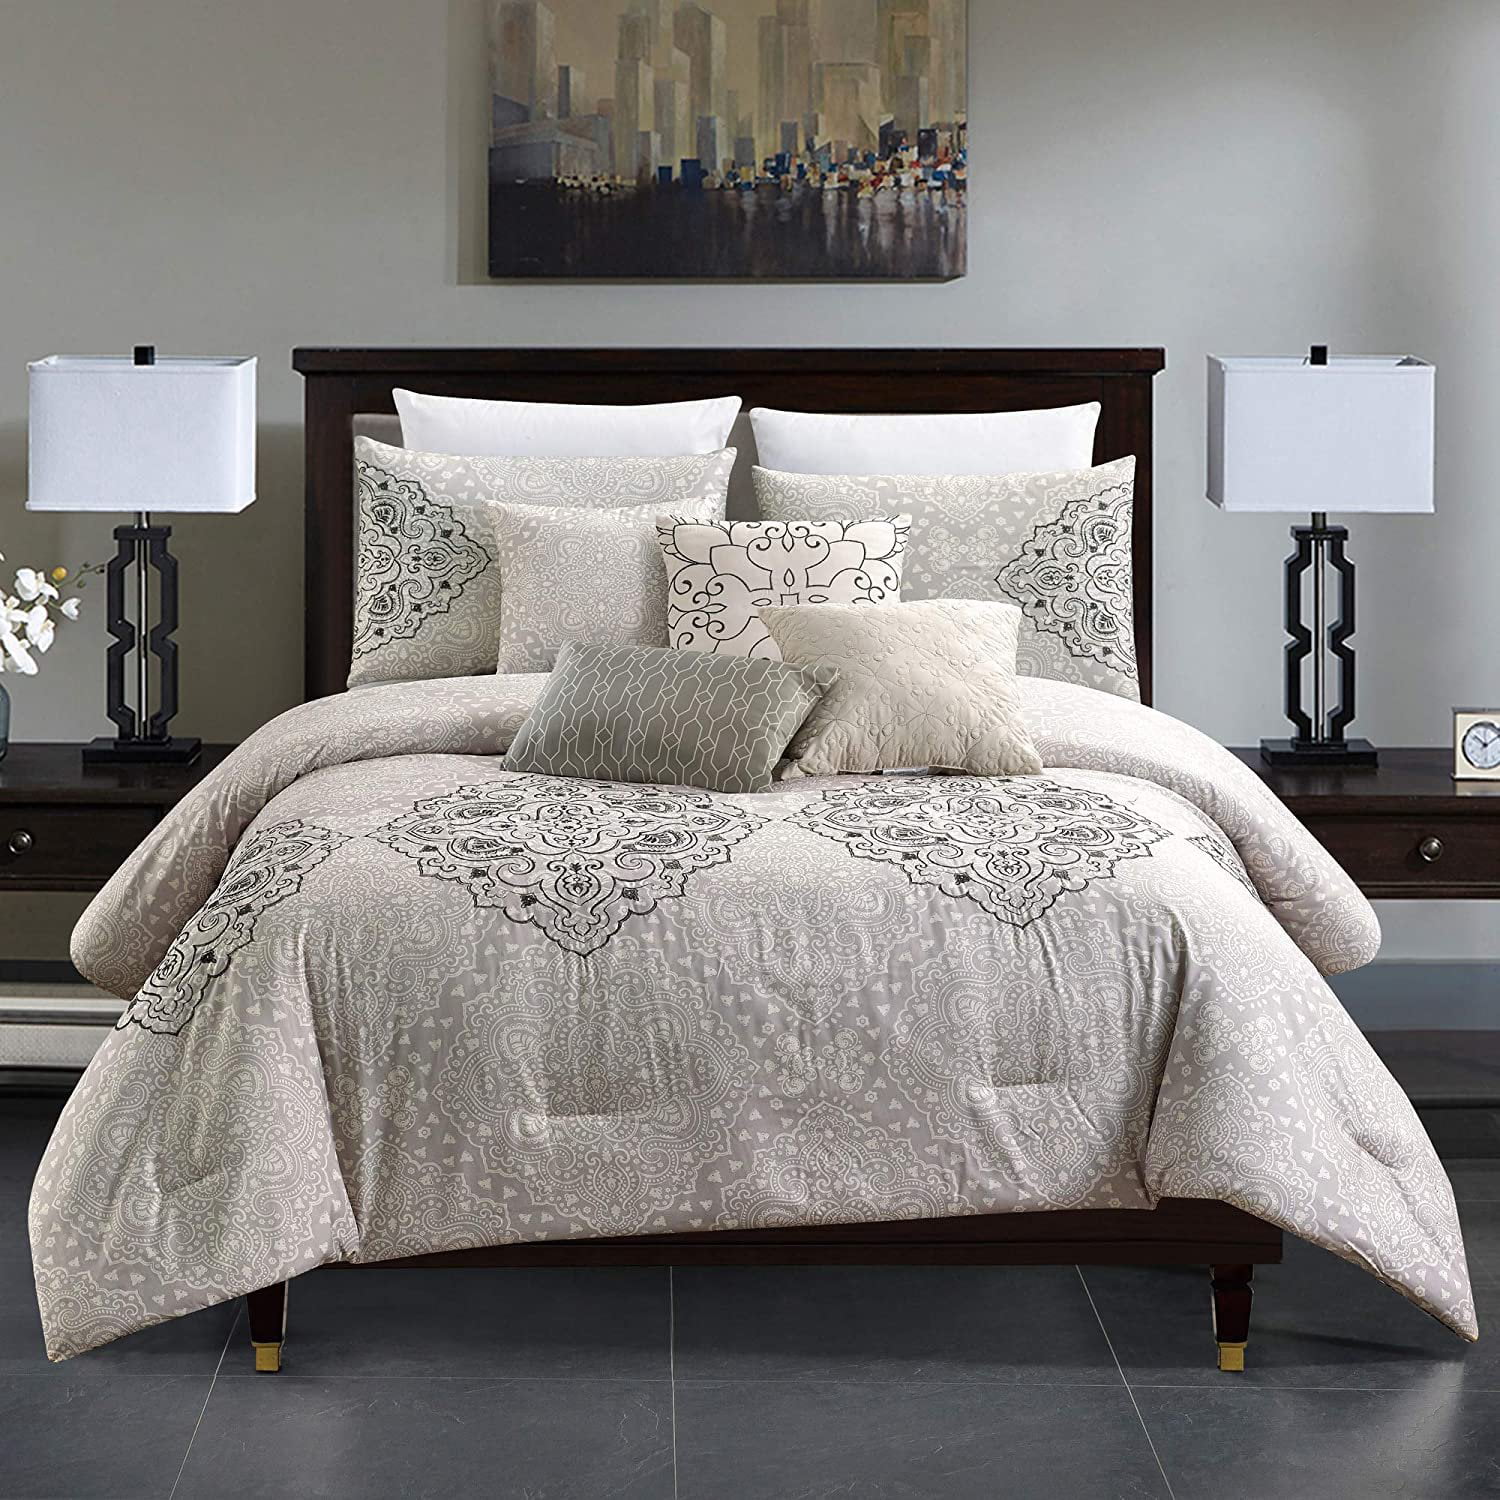 Sapphire Home Luxury 7 Piece King, Size Difference Between King And California Bedspread